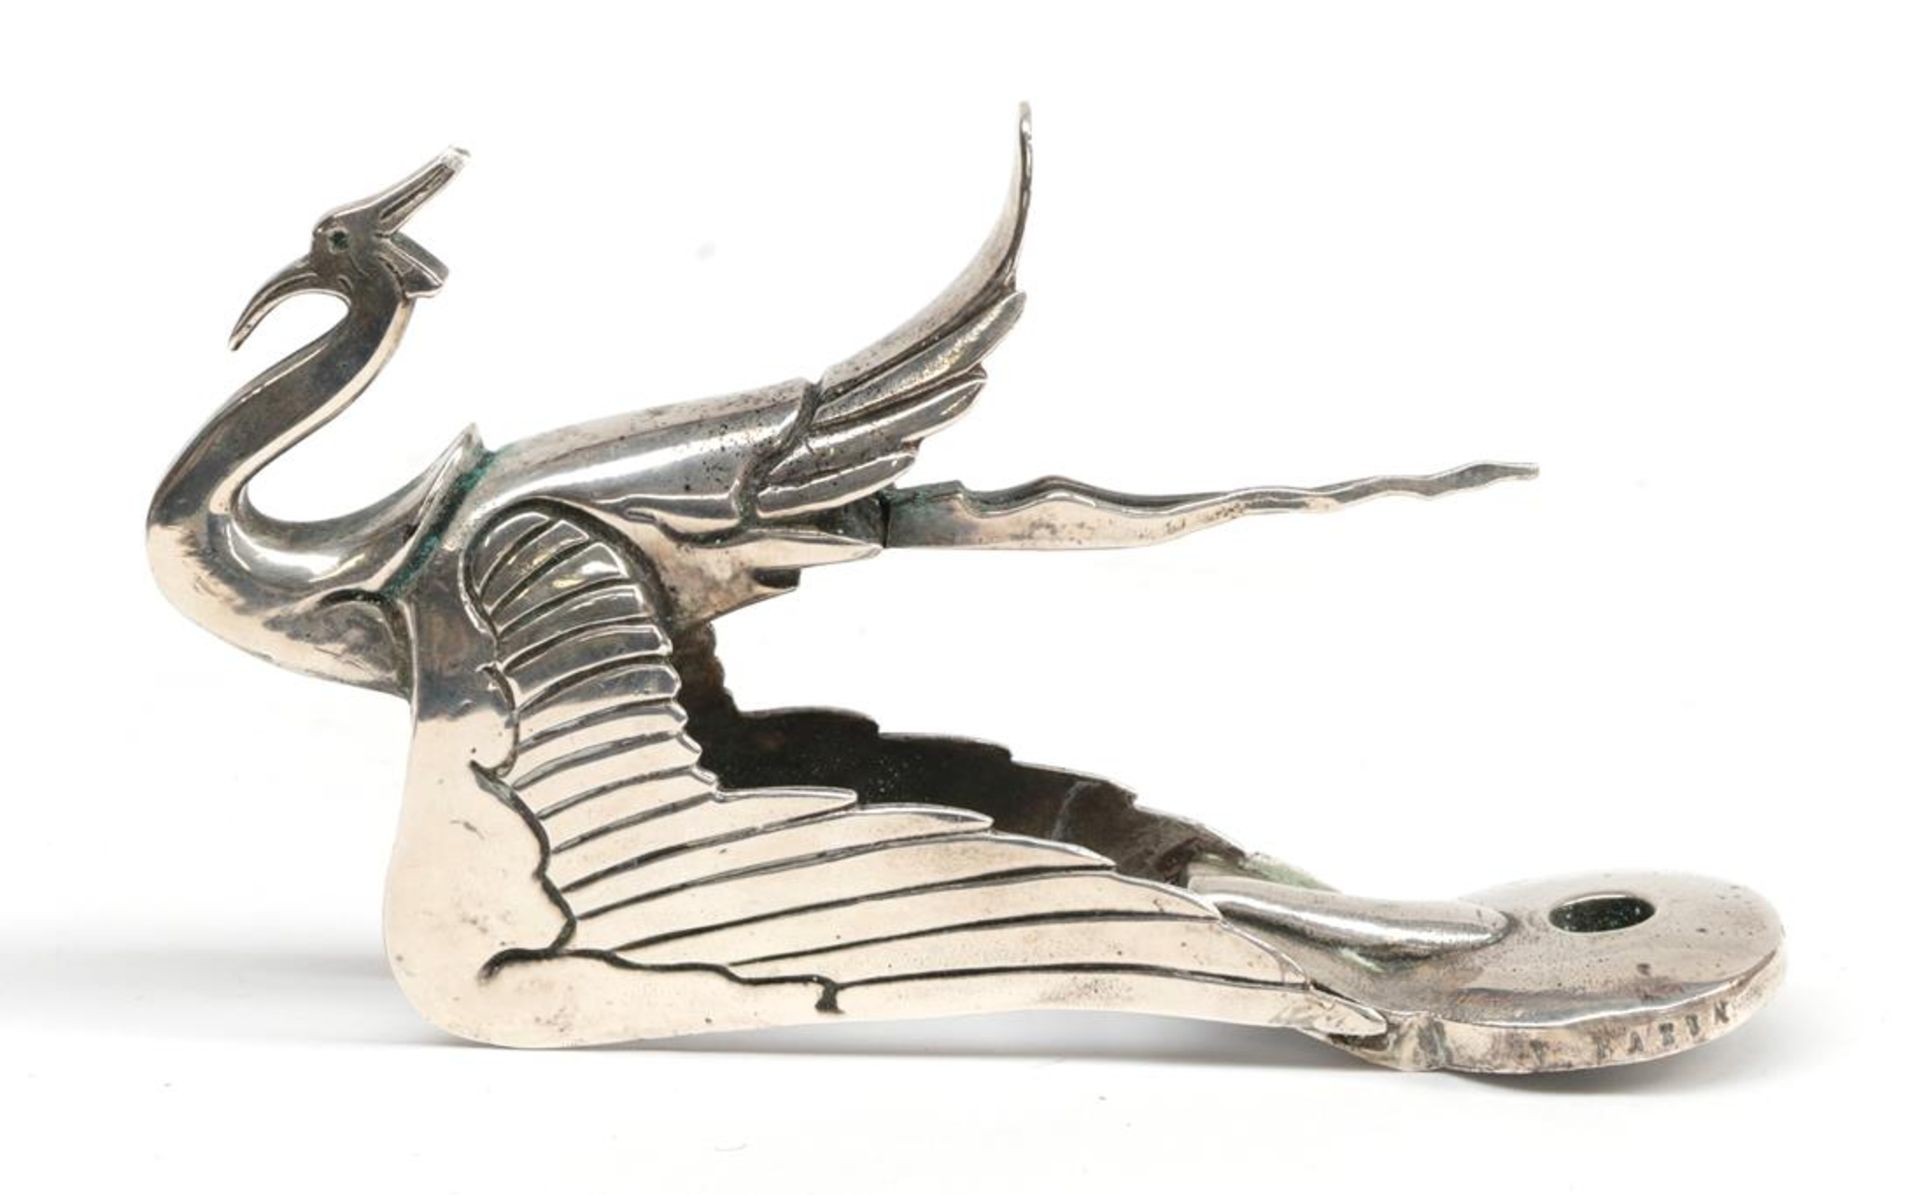 Francis Bazin: A Rare 1920's Art Deco Nickel Plated Car Mascot as a Wild Swan, similar examples were